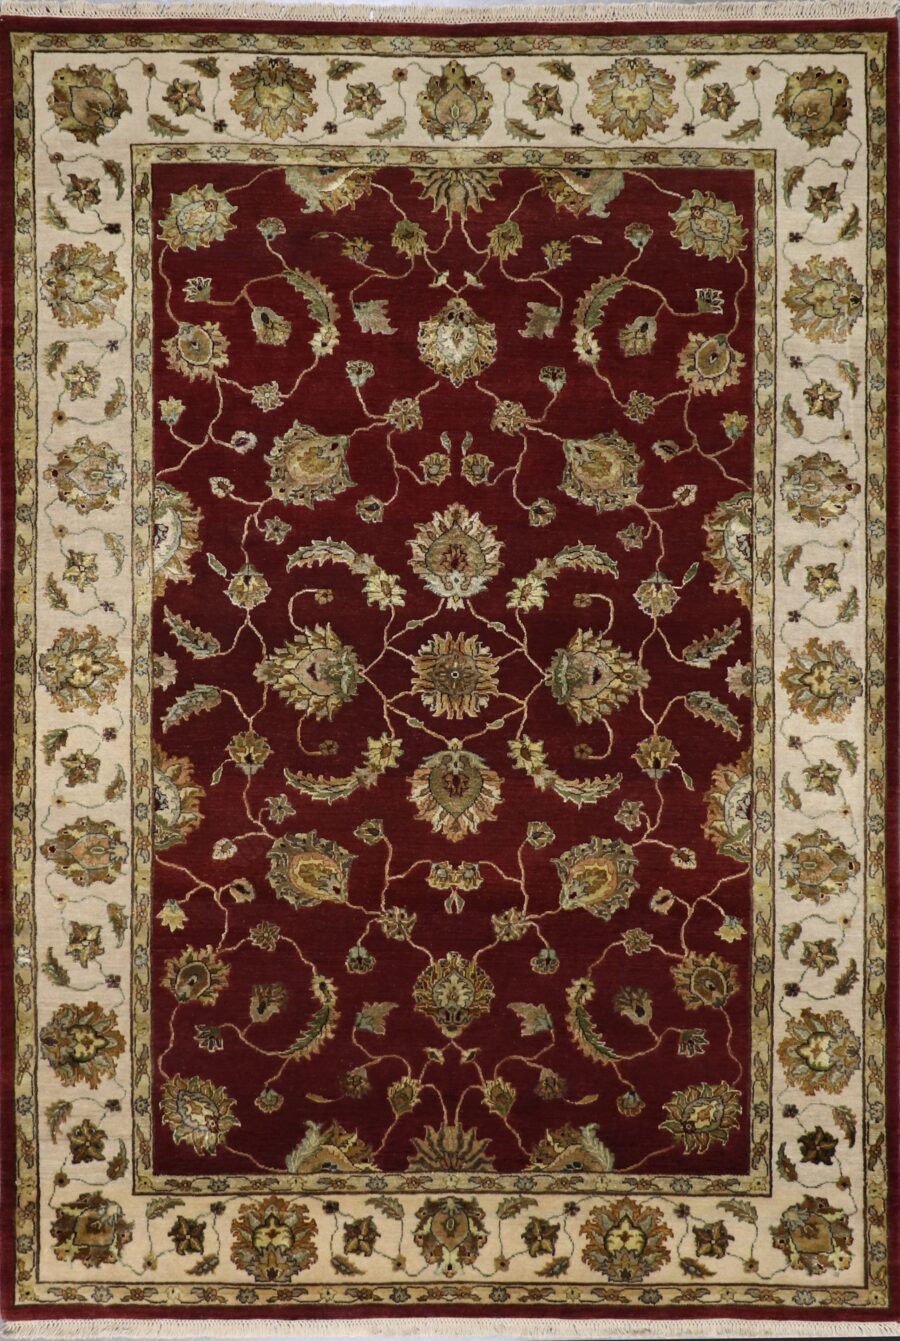 5'11"x8'11" Traditional Burgundy Wool & Silk Hand-Knotted Rug - Direct Rug Import | Rugs in Chicago, Indiana,South Bend,Granger